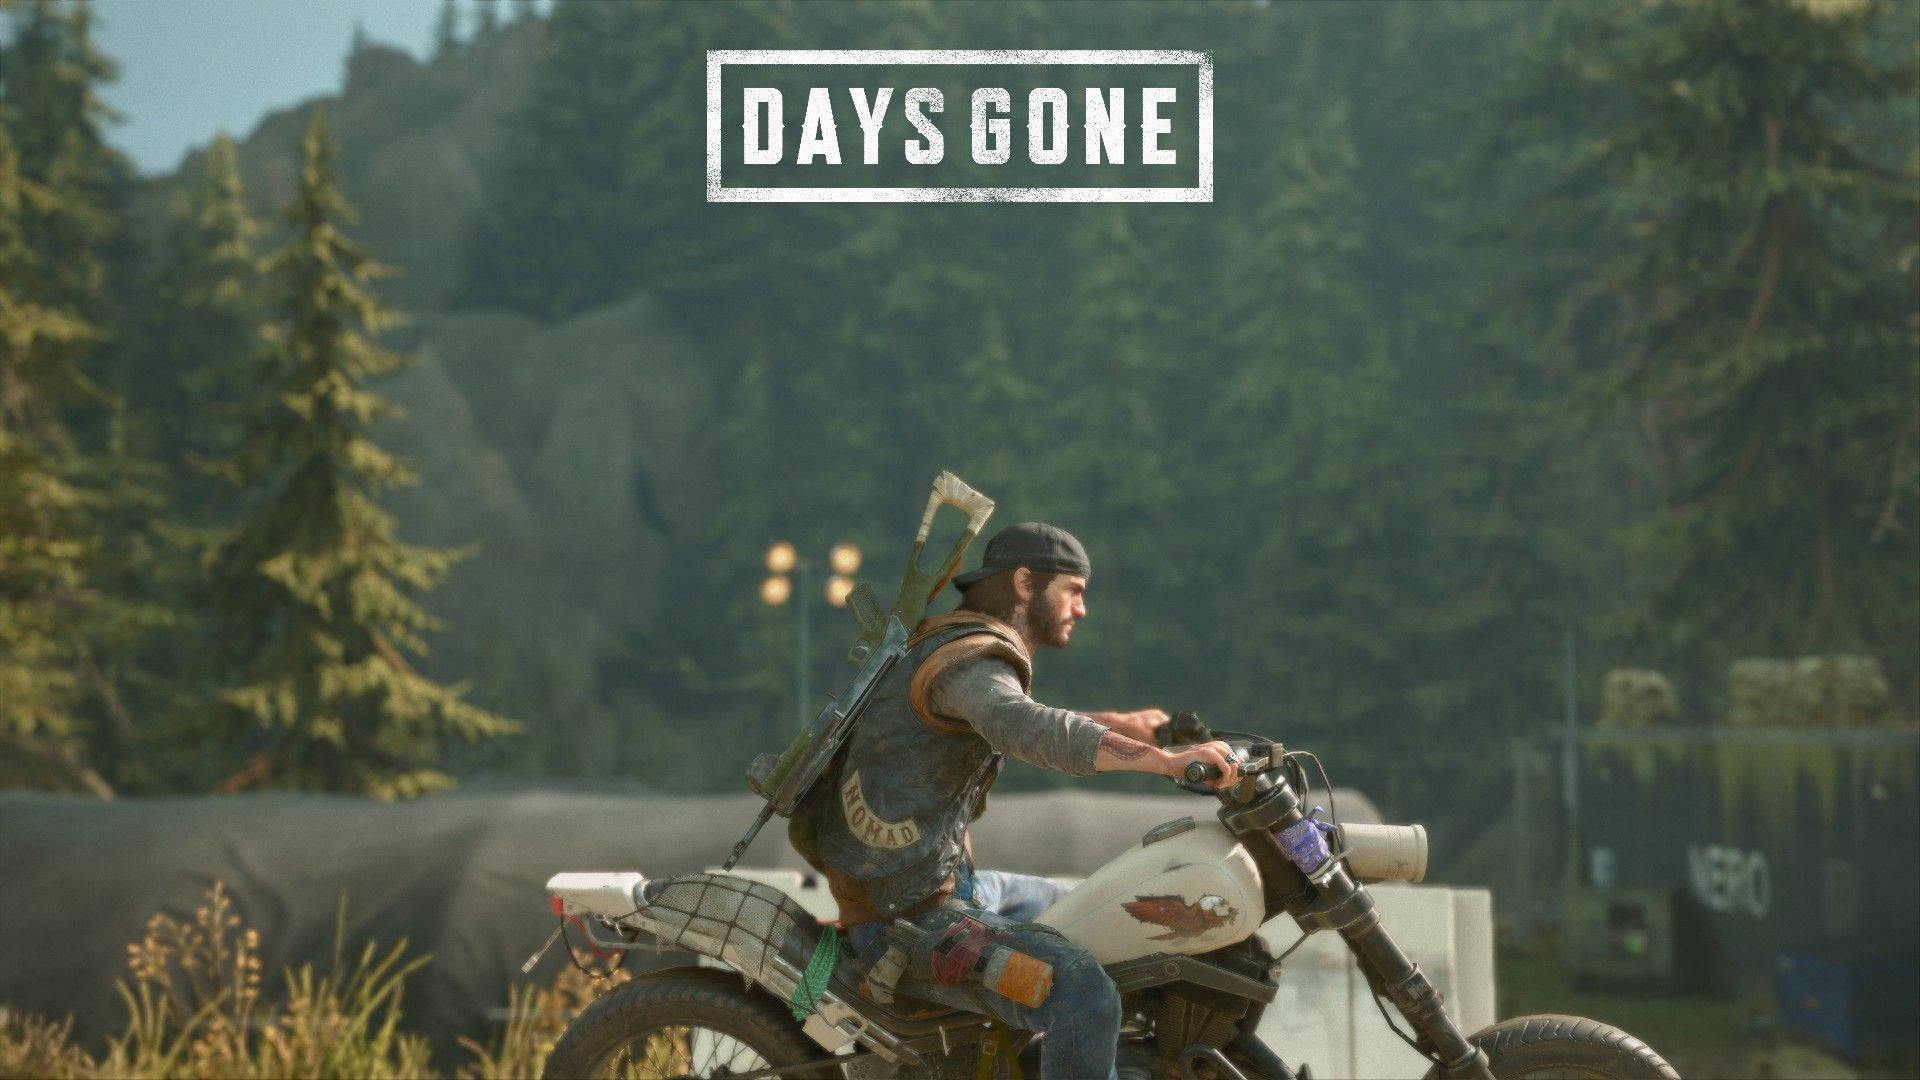 Dare to live free with Deacon St. John in Days Gone. Wallpaper